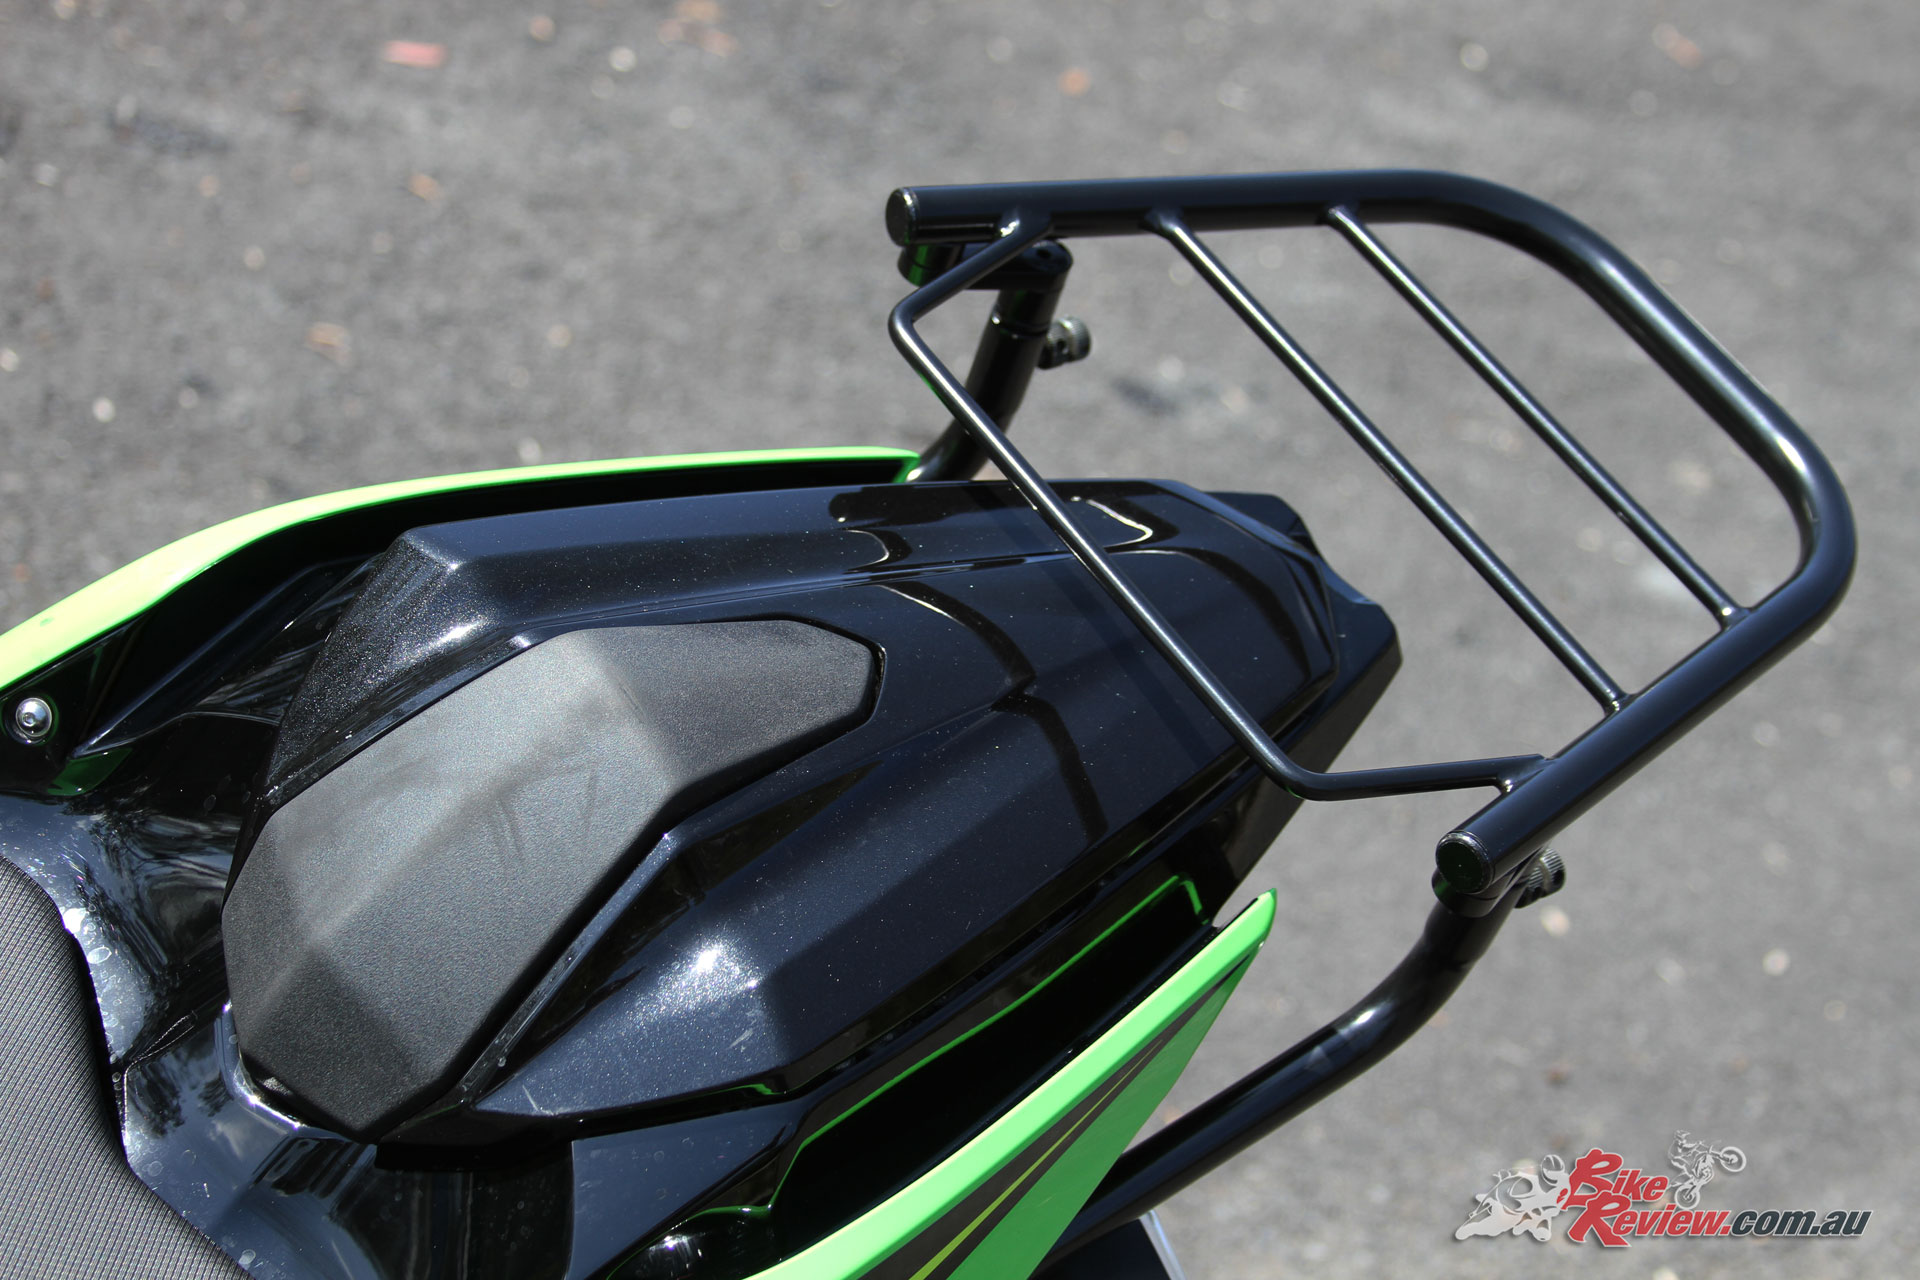 The Ventura EVO Rack and Kawasaki Seat Cowl are a great sporty combo